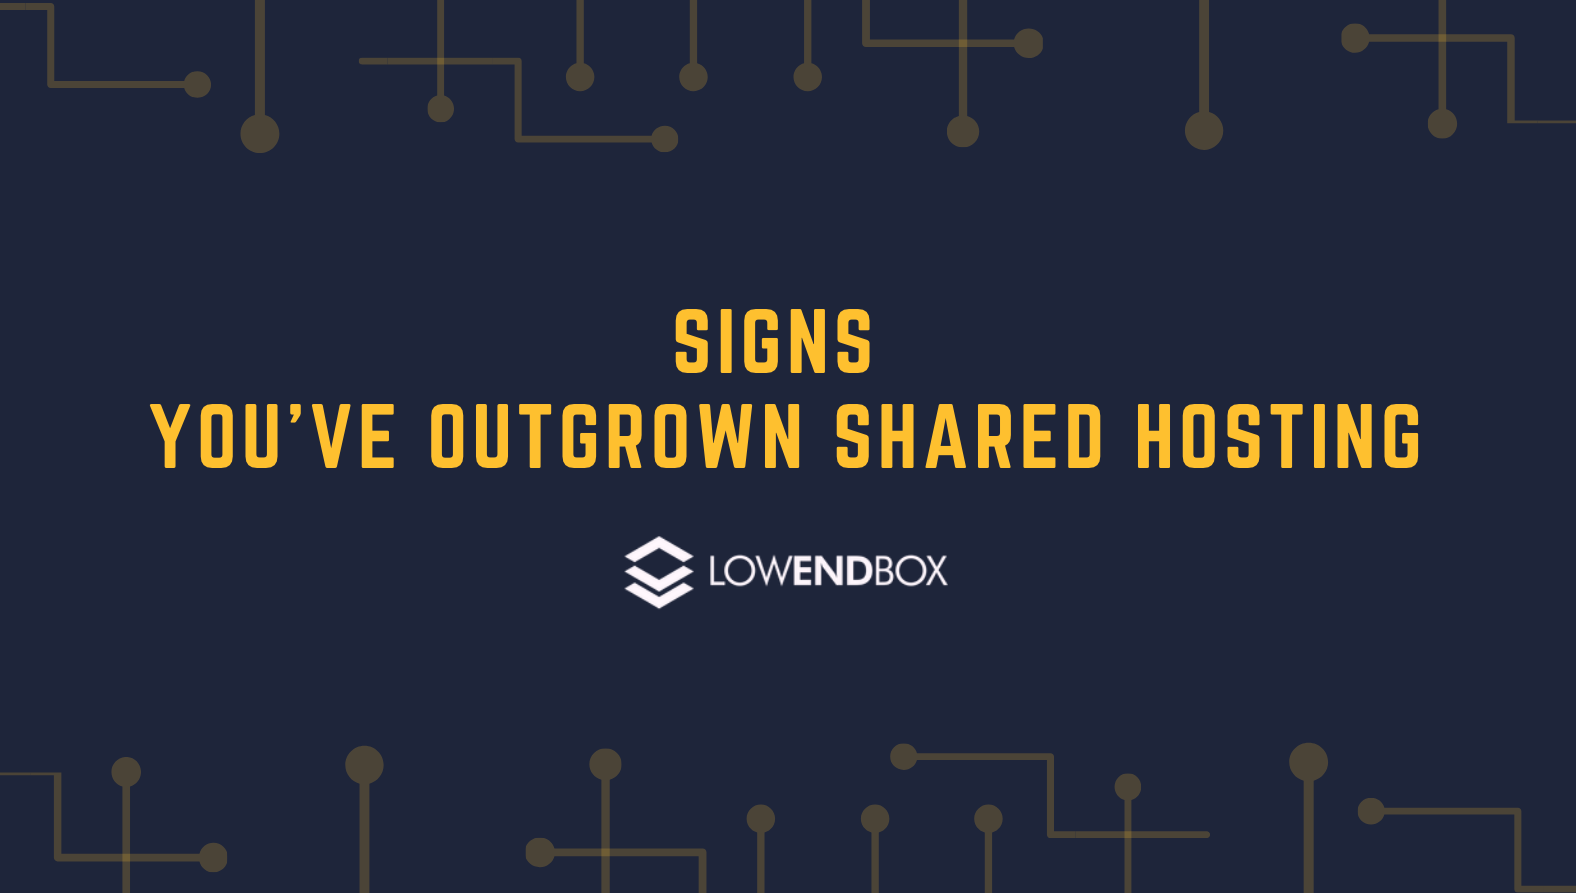 Signs That You've Outgrown Shared Hosting and Should Upgrade to a VPS